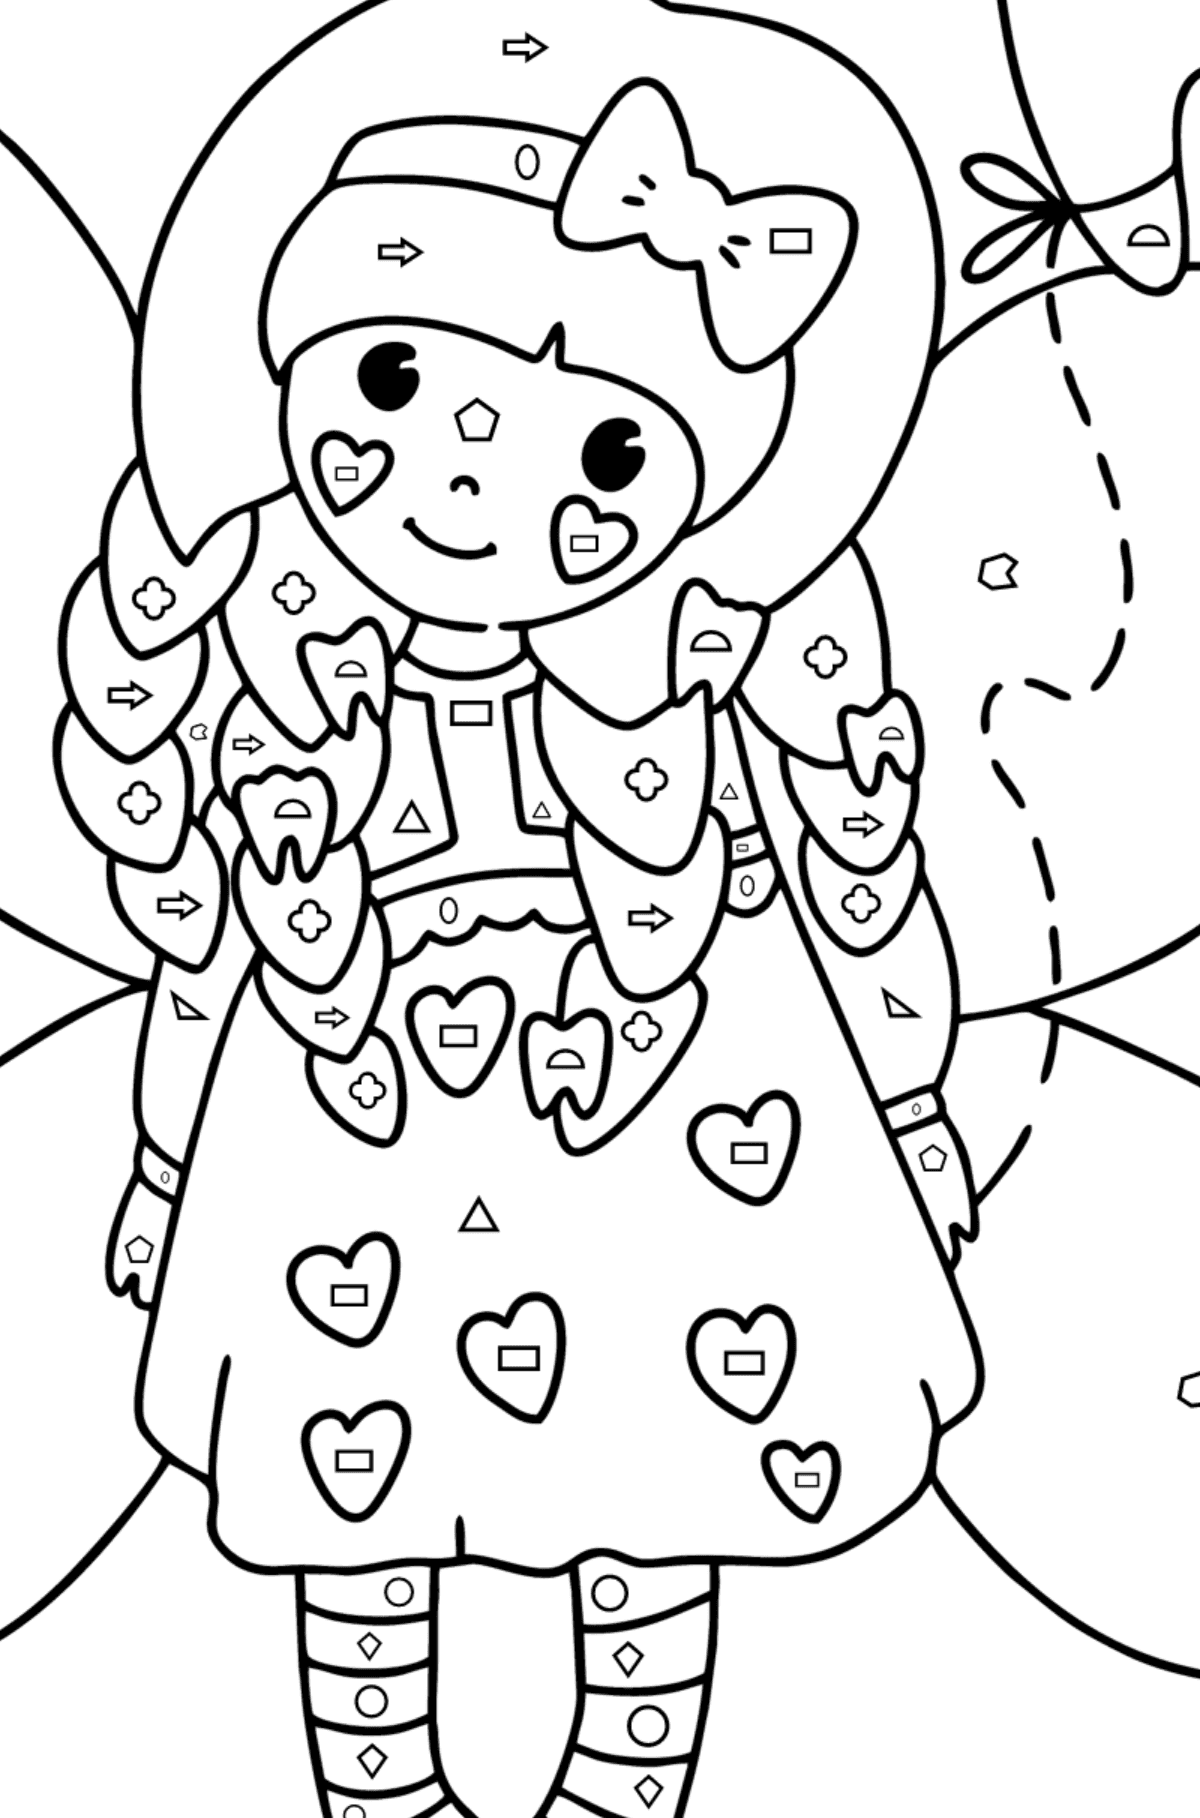 Tooth Fairy coloring page - Coloring by Geometric Shapes for Kids